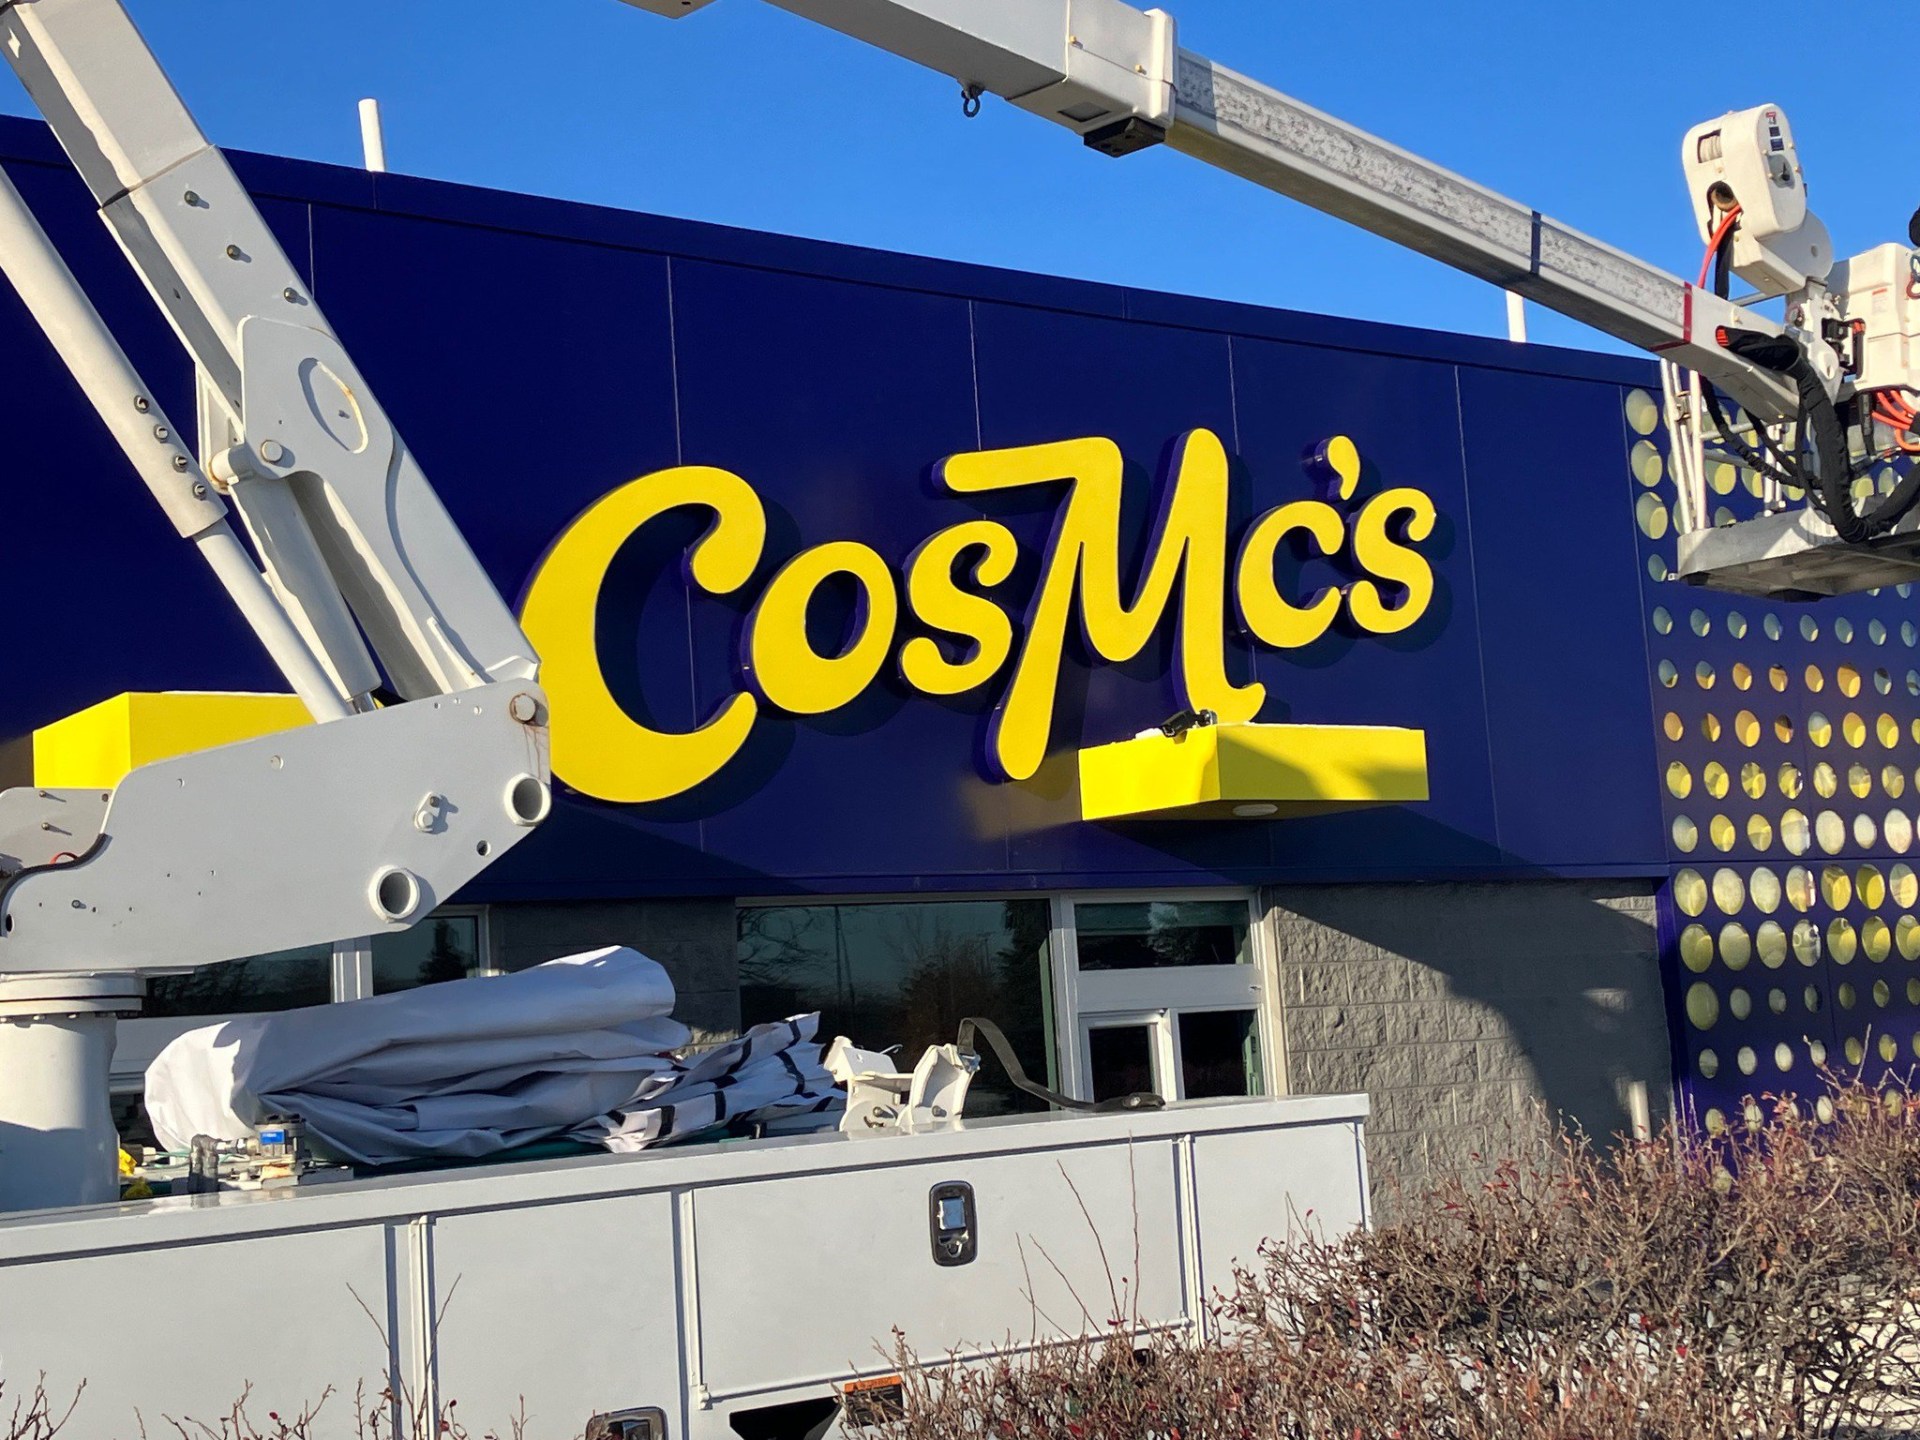 mcdonald's secret new spin off chain cosmc's prepares to open — here's what we know so far